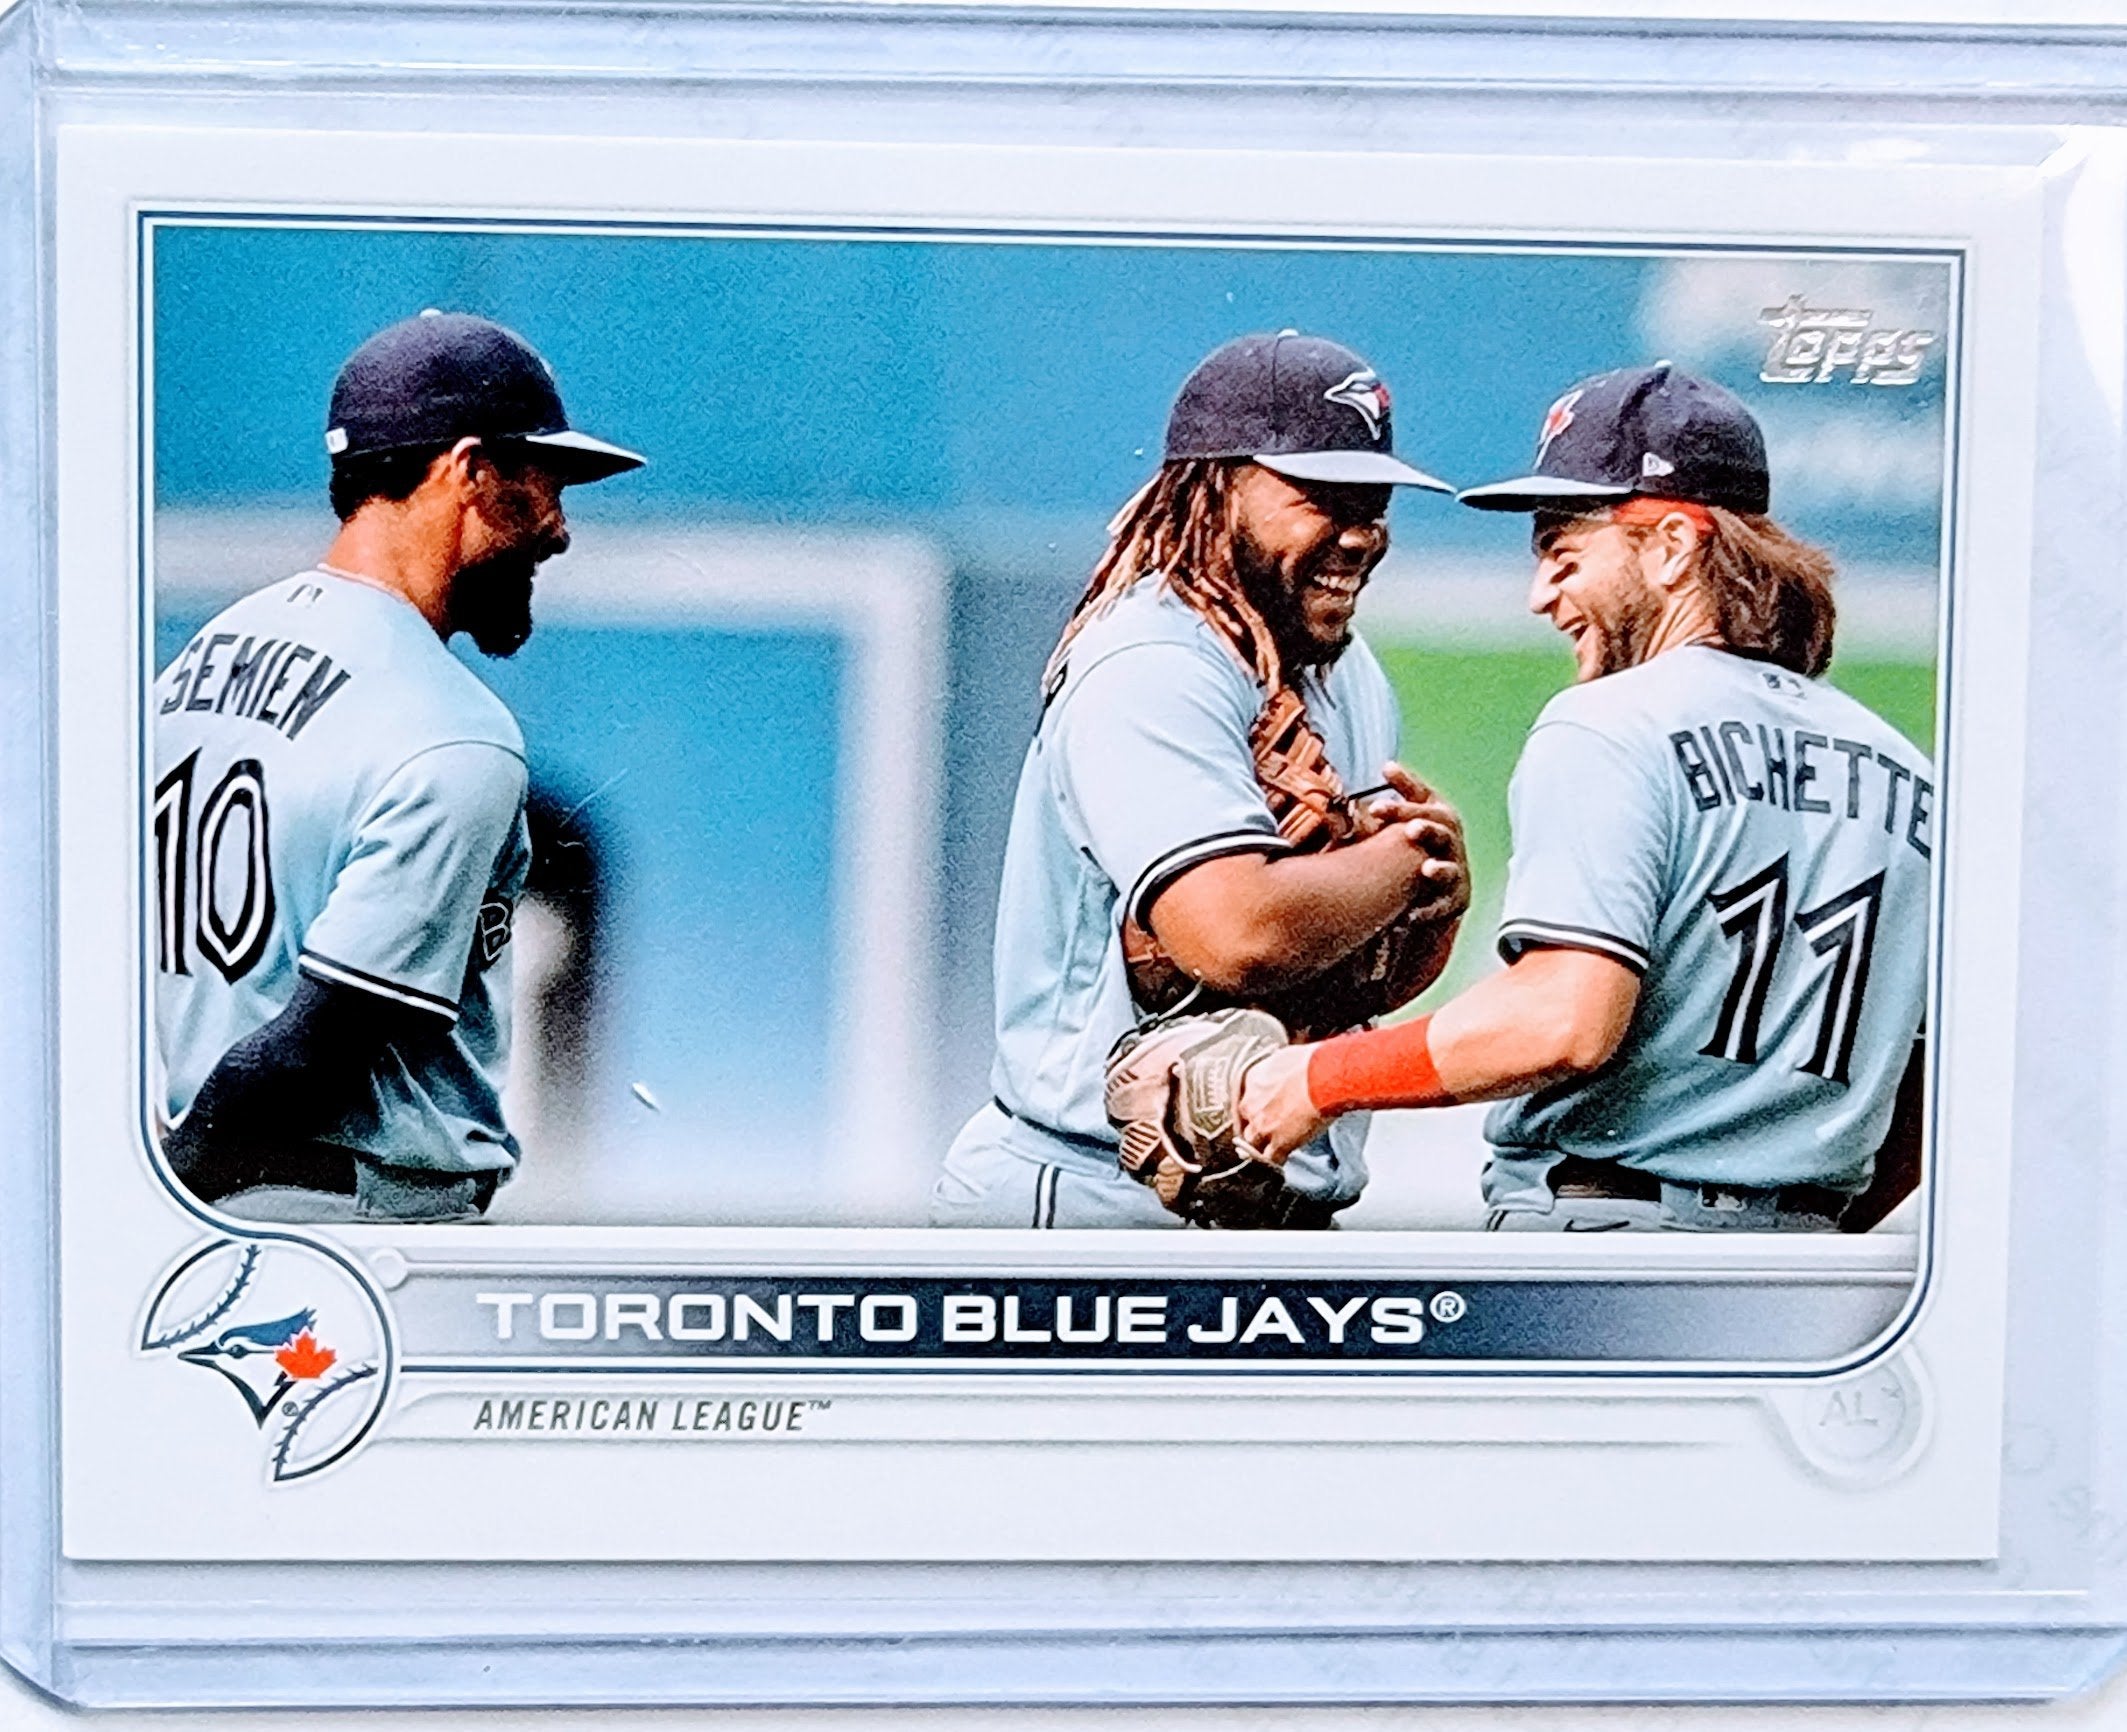 2022 Topps Toronto Blue Jays Team Baseball Trading Card GRB1 simple Xclusive Collectibles   